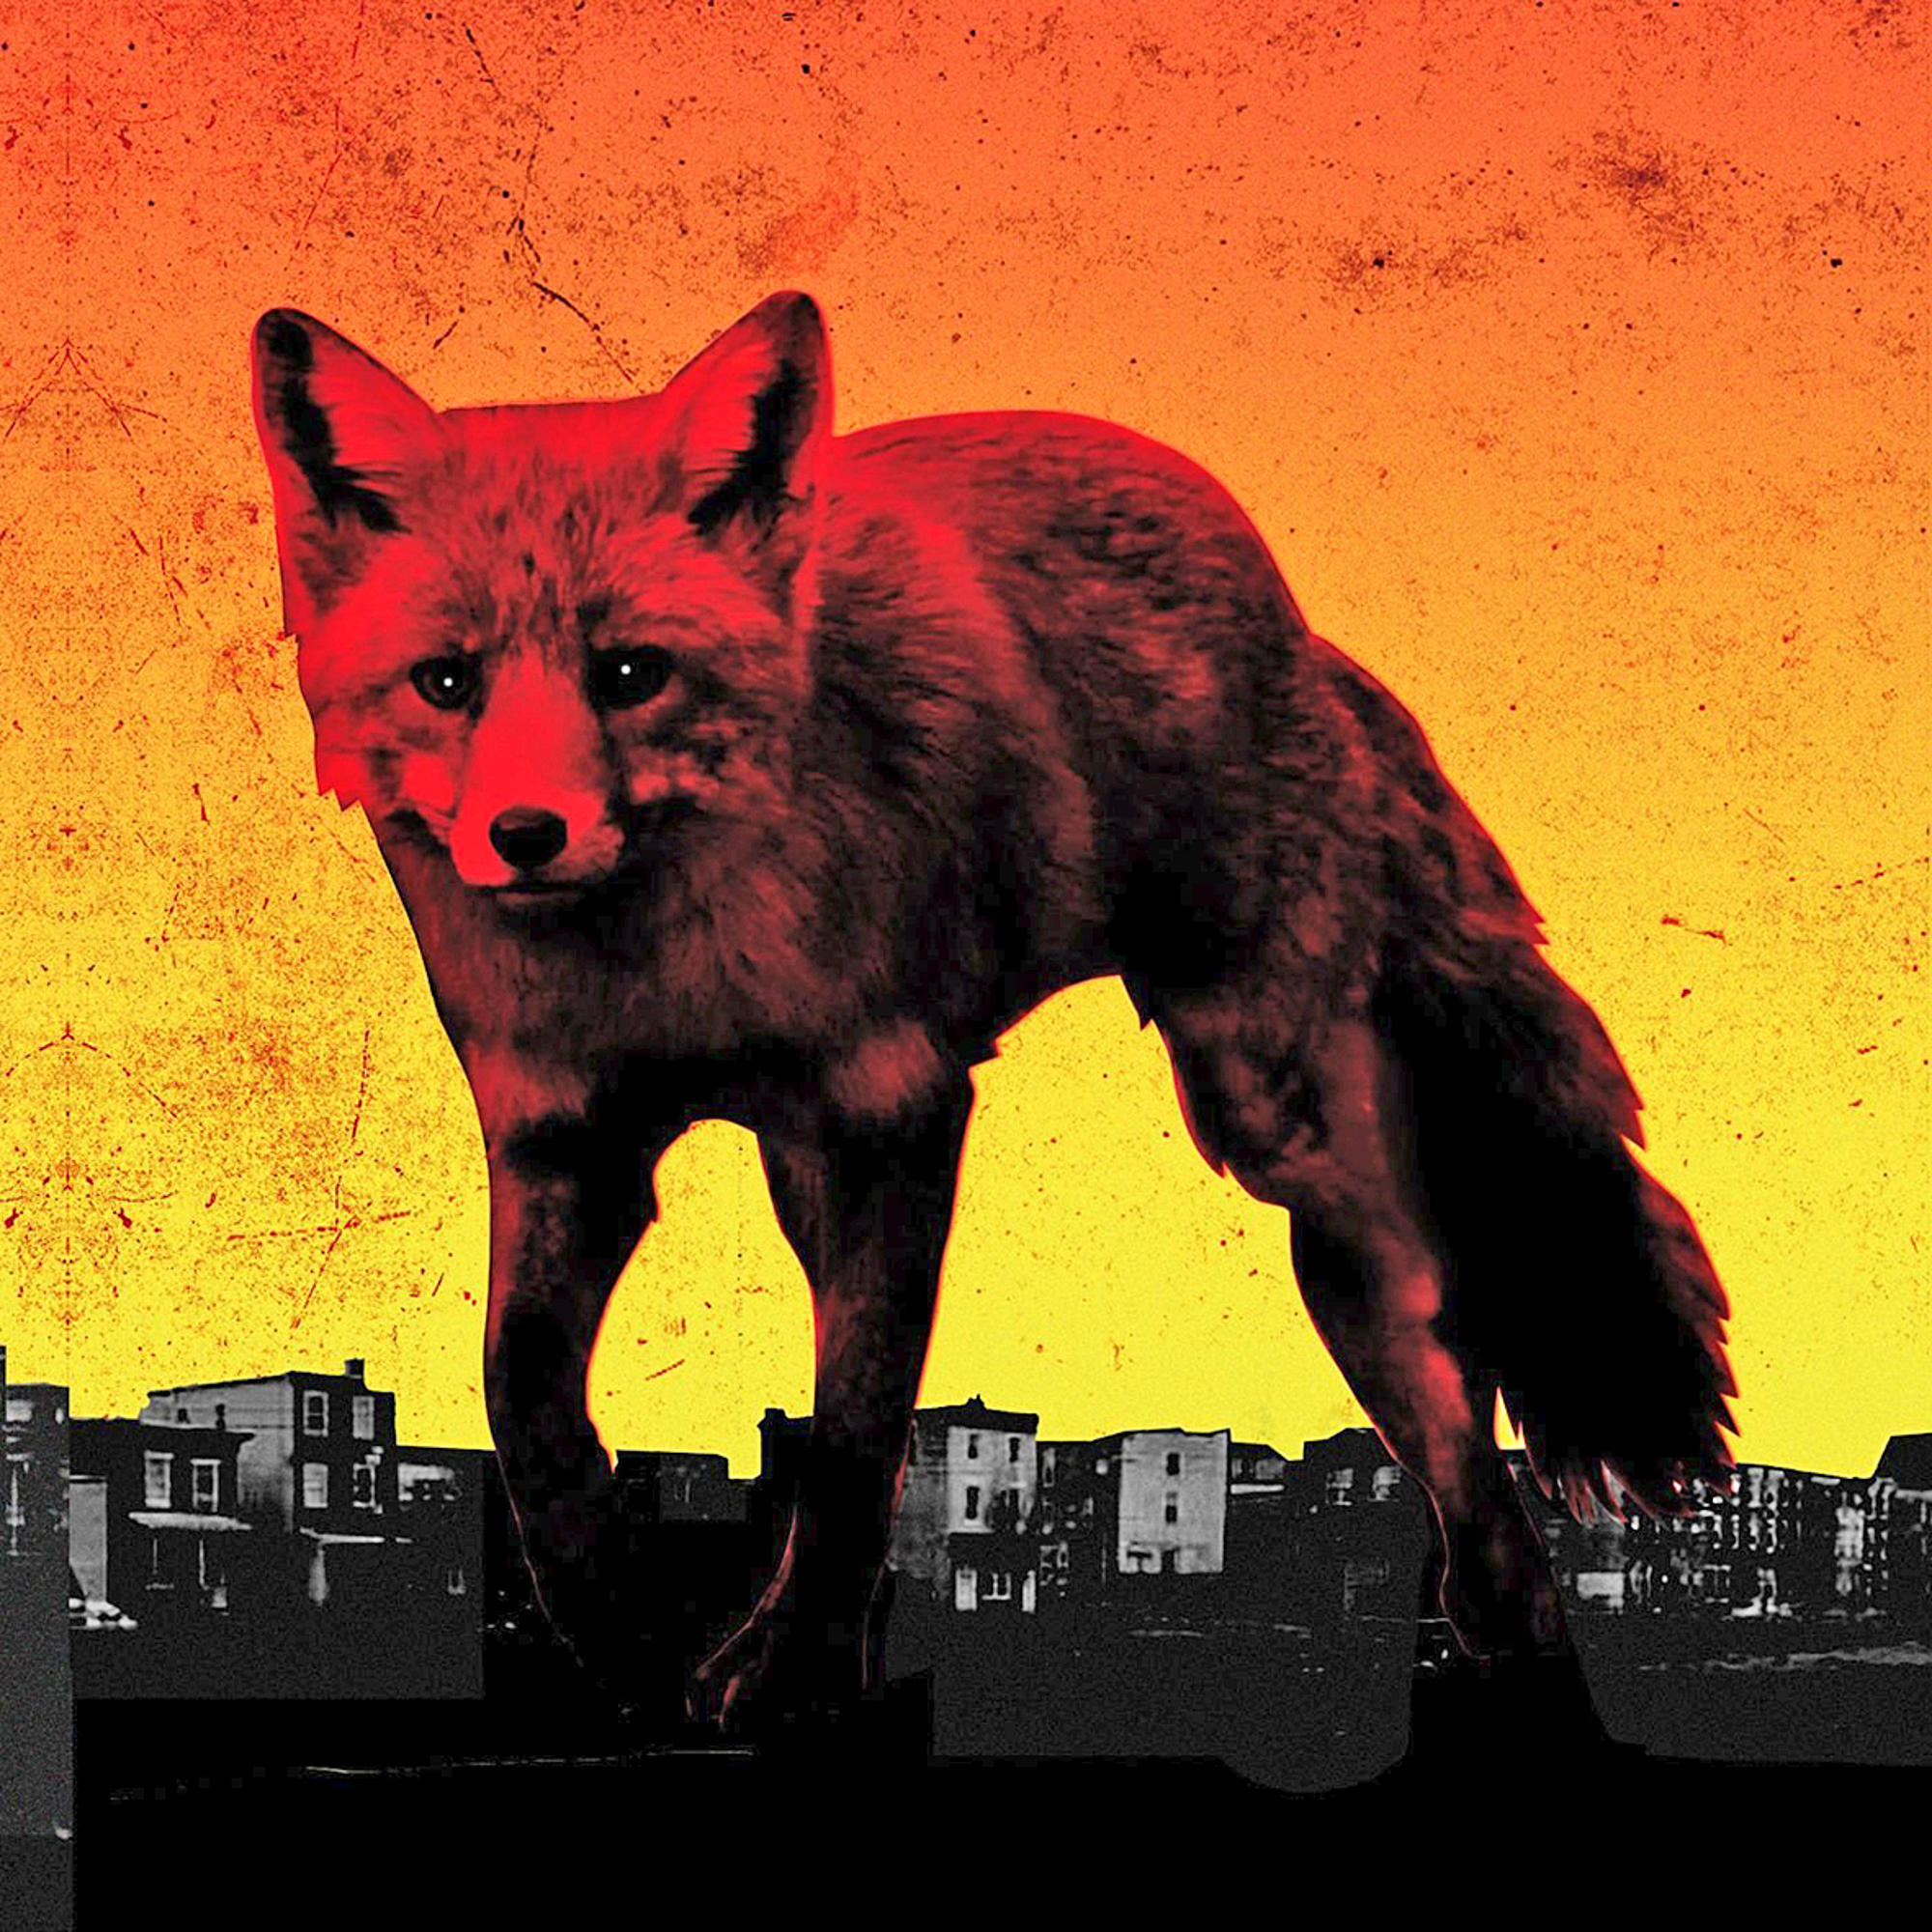 The Prodigy - The Is Day My (CD) - Enemy